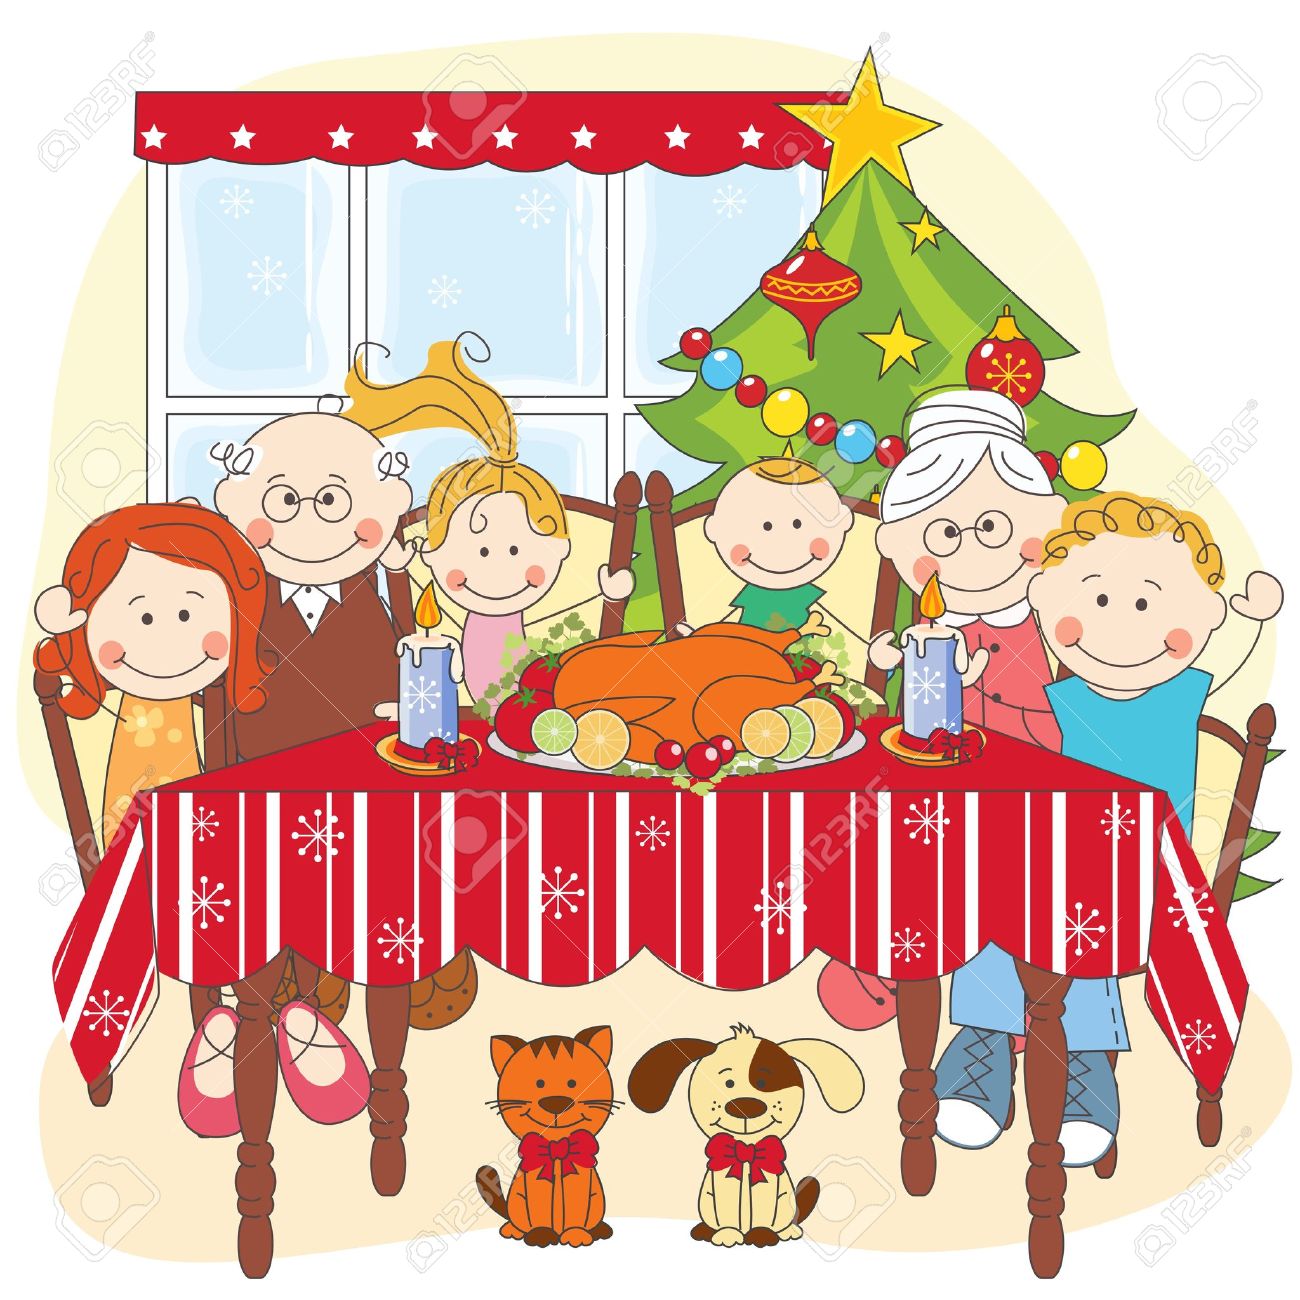 14,415 Christmas Family Cliparts, Stock Vector And Royalty Free.